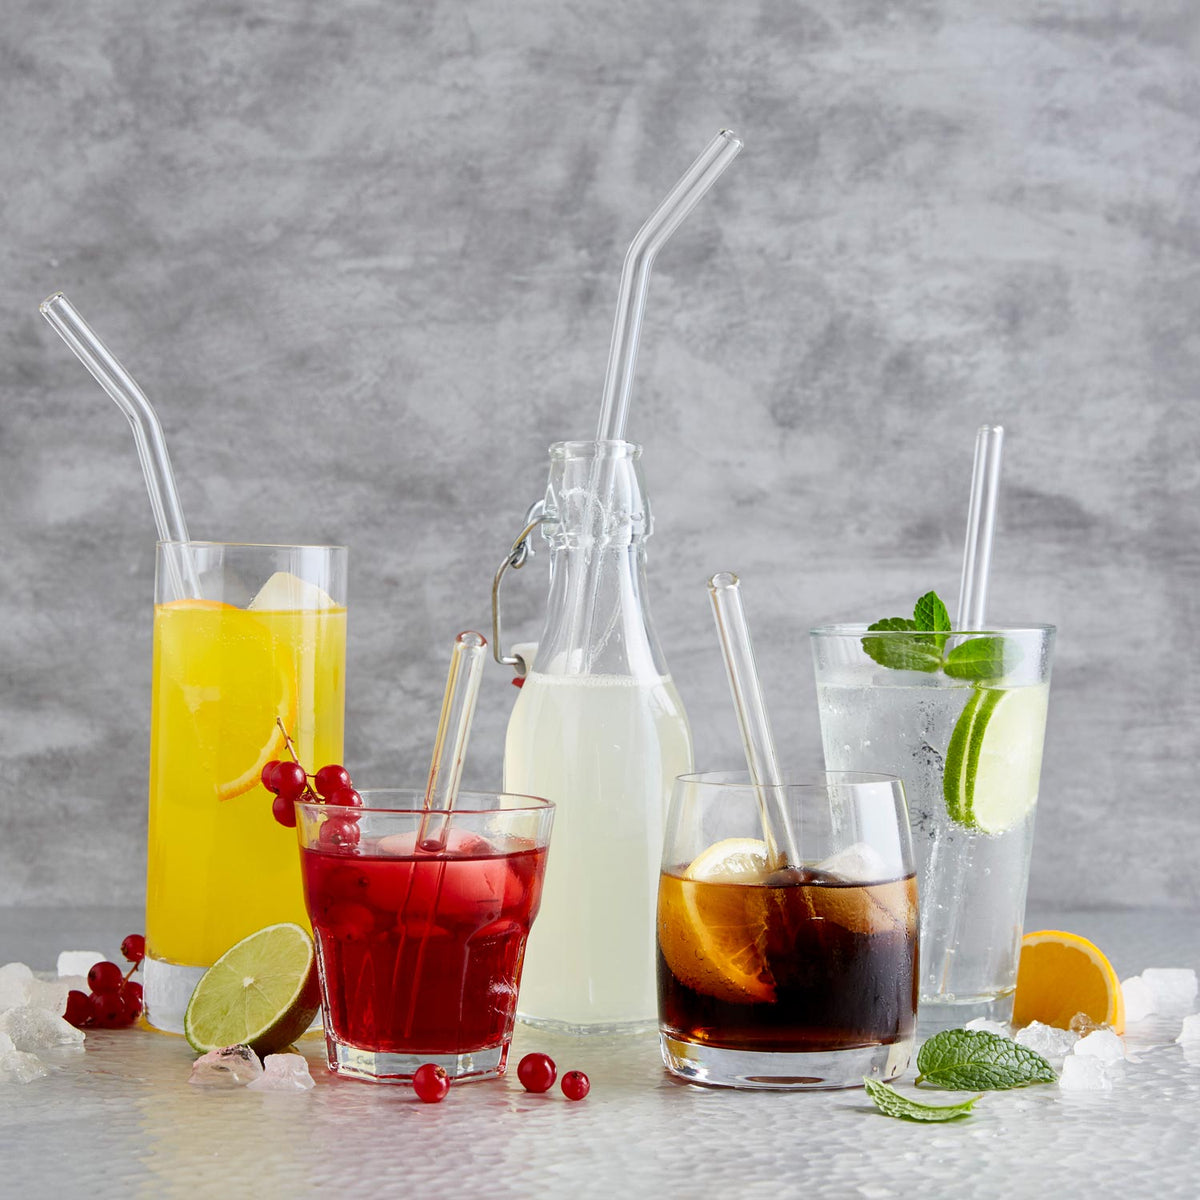 h?lm Halm Glass Straws - 6 Reusable Drinking Straws + Plastic-Free Cleaning Brush - Made in Germany - Dishwasher Safe - 20 cm (8 in)